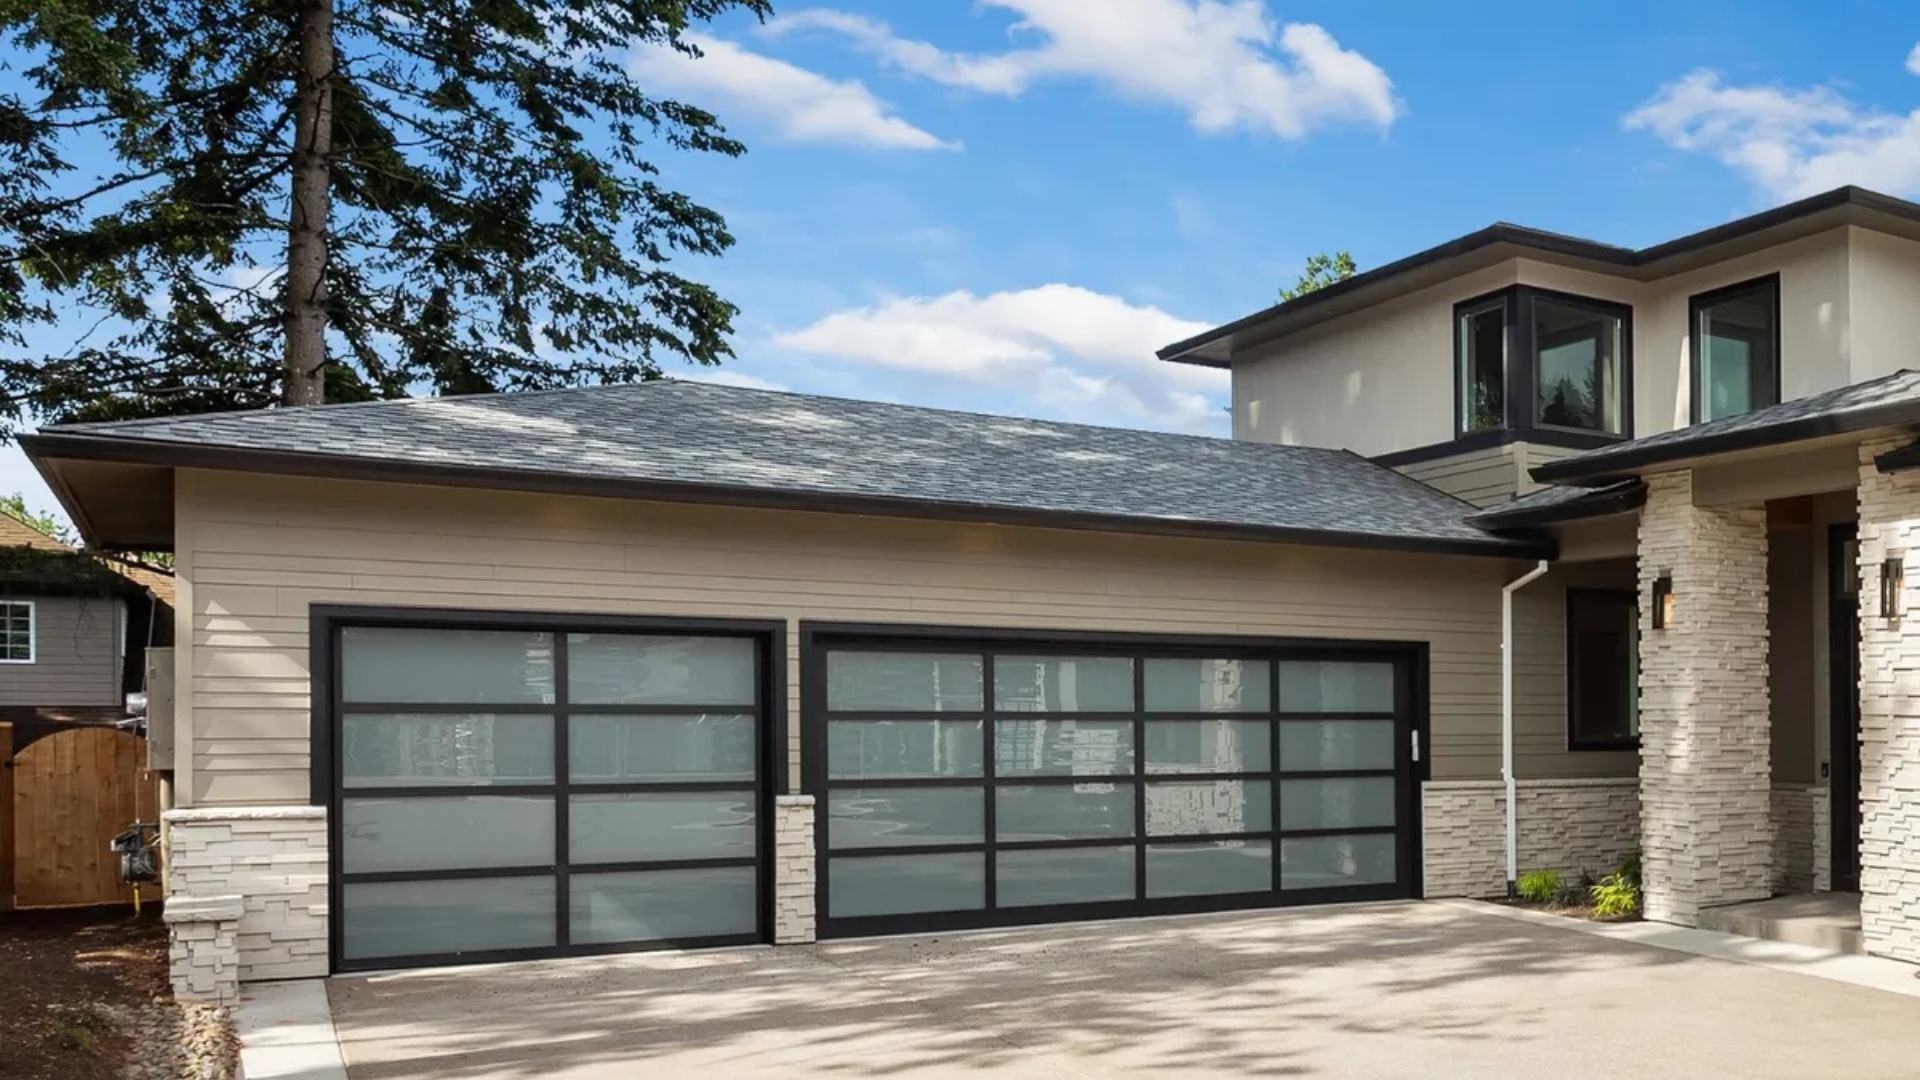 A house with aluminum glass garage doors. This is one of the types of garage doors